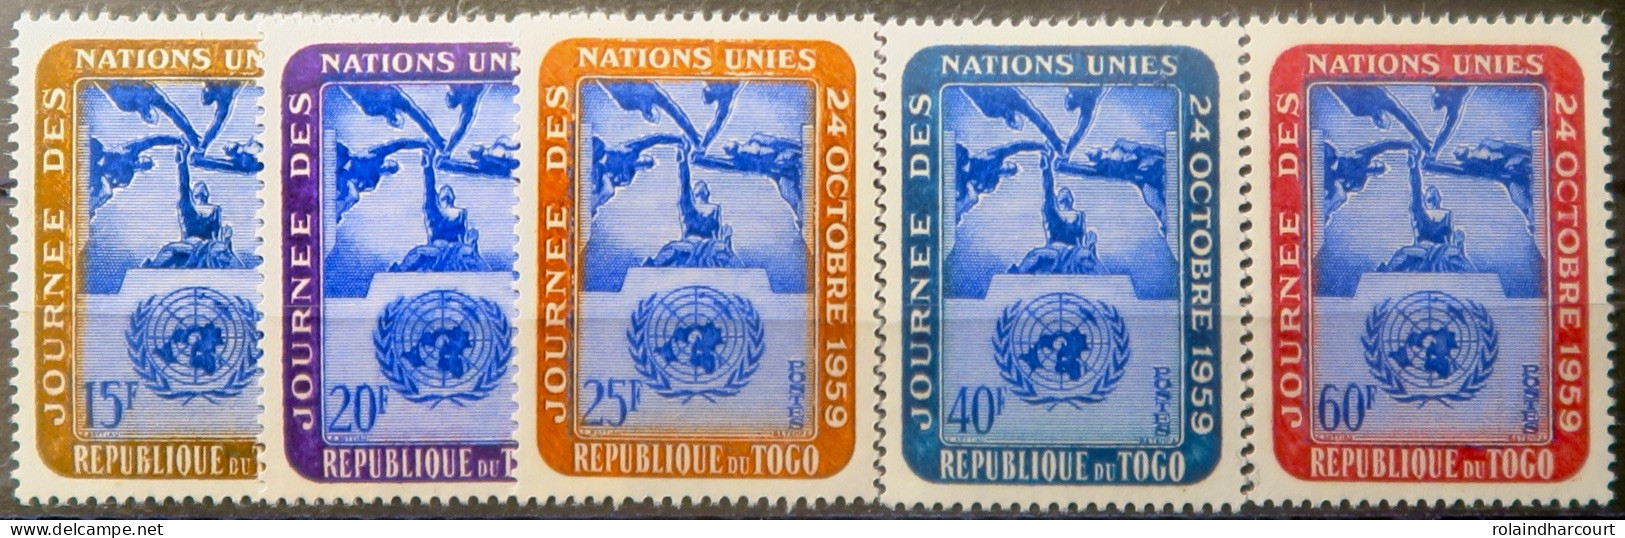 R2253/840 - TOGO - 1959 - NATIONS UNIES - SERIES COMPLETES - N°295 à 299 NEUFS* - Togo (1960-...)